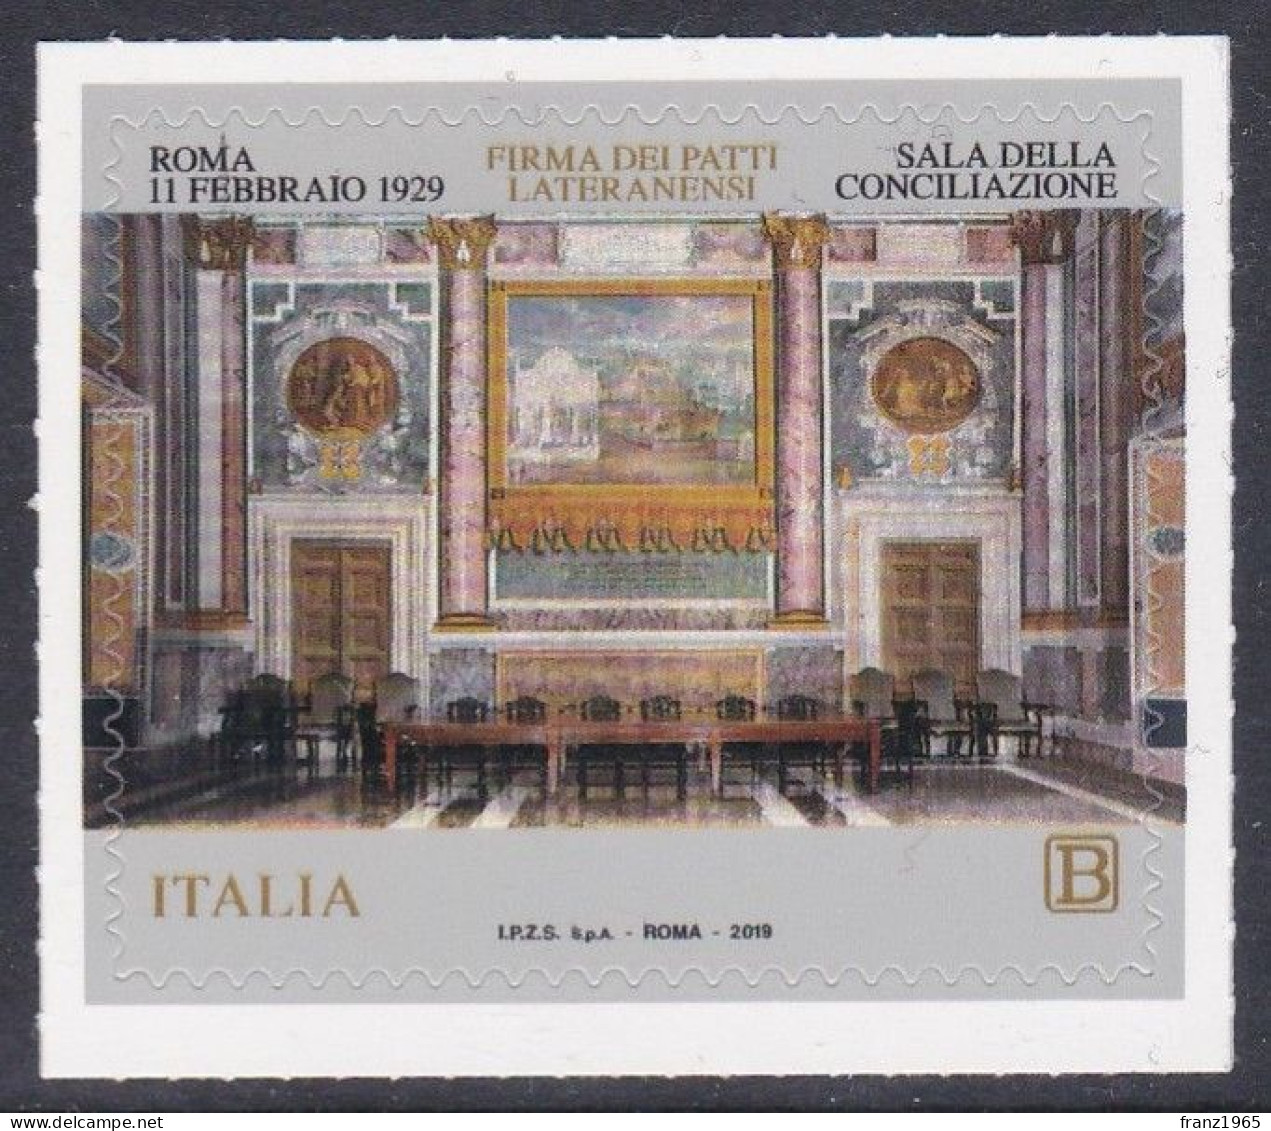 90th Anniversary Of The Lateran Accords With The Vatican - 2019 - 2011-20: Mint/hinged